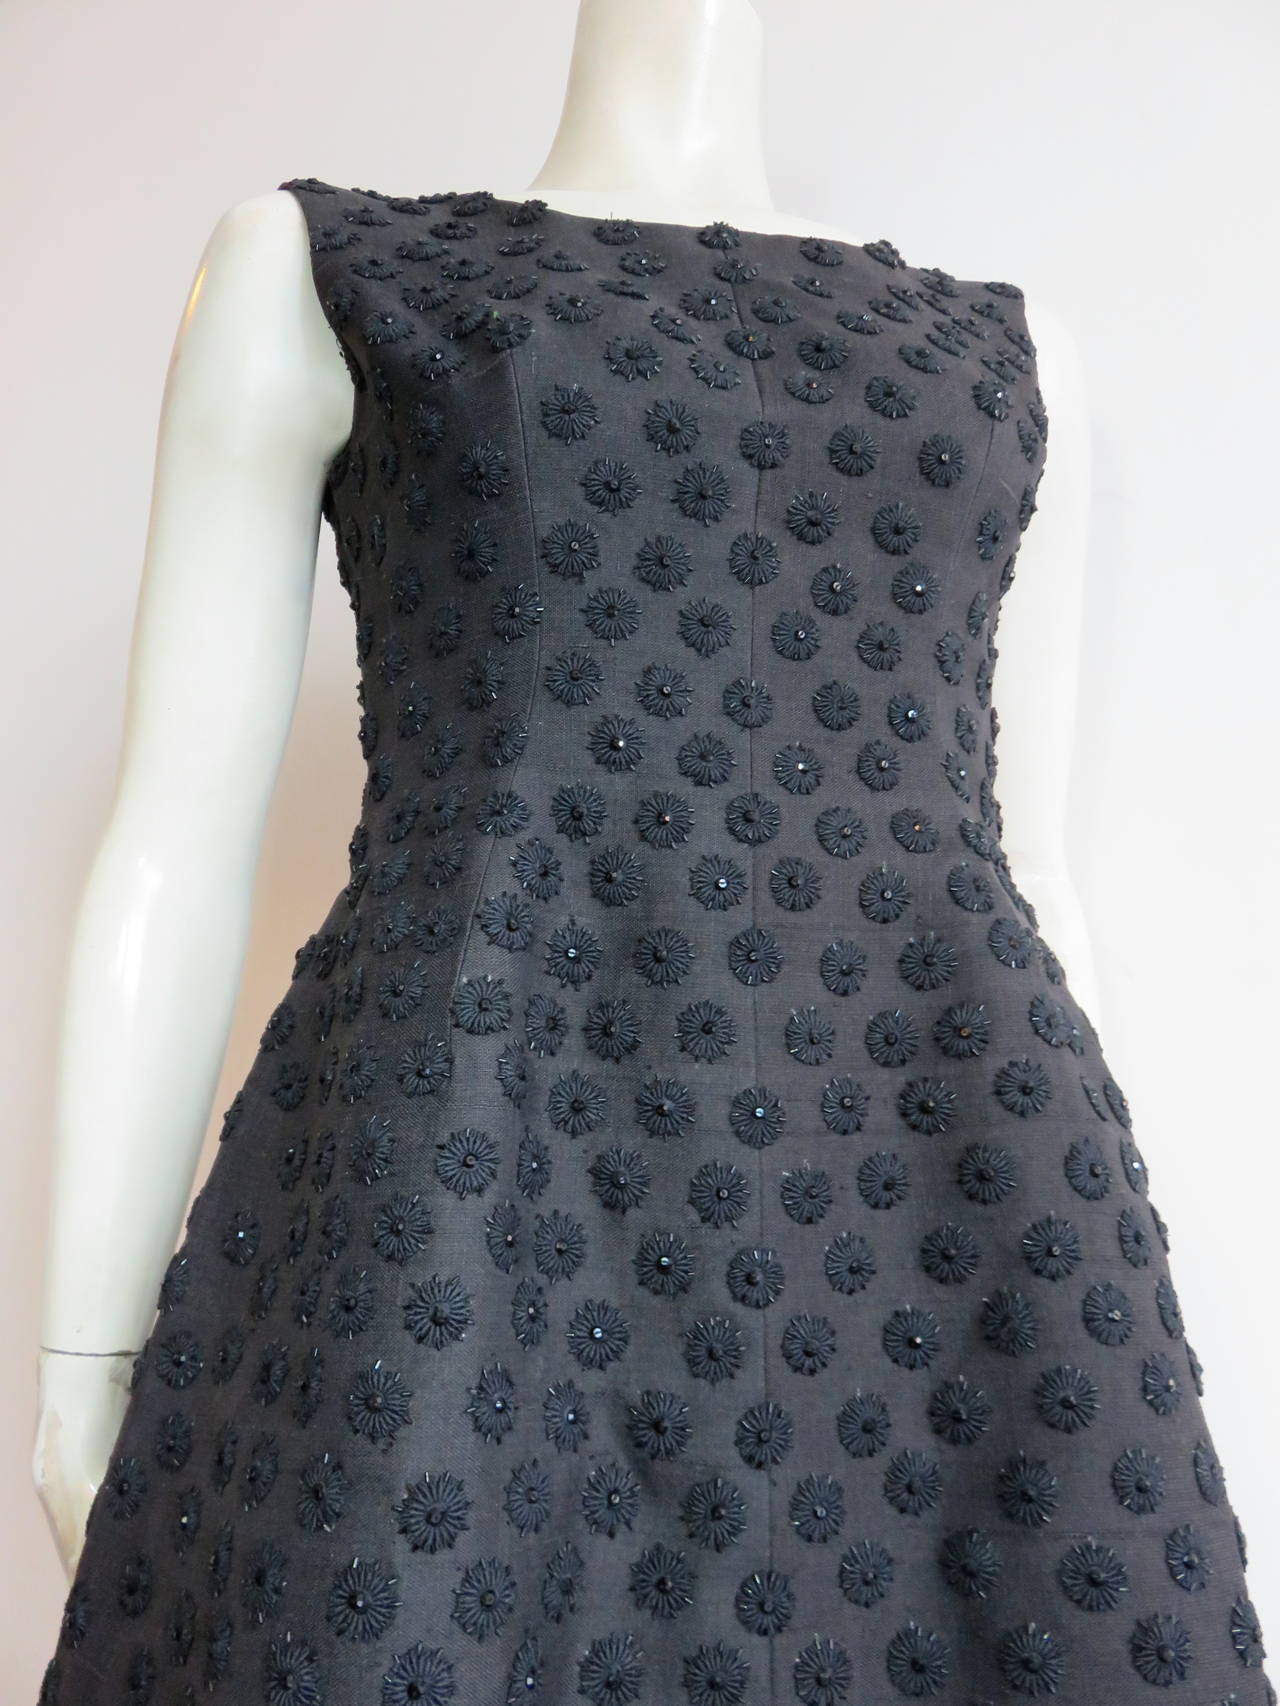 1961 GIVENCHY Haute Couture embellished cocktail dress -  Met Museum piece 2